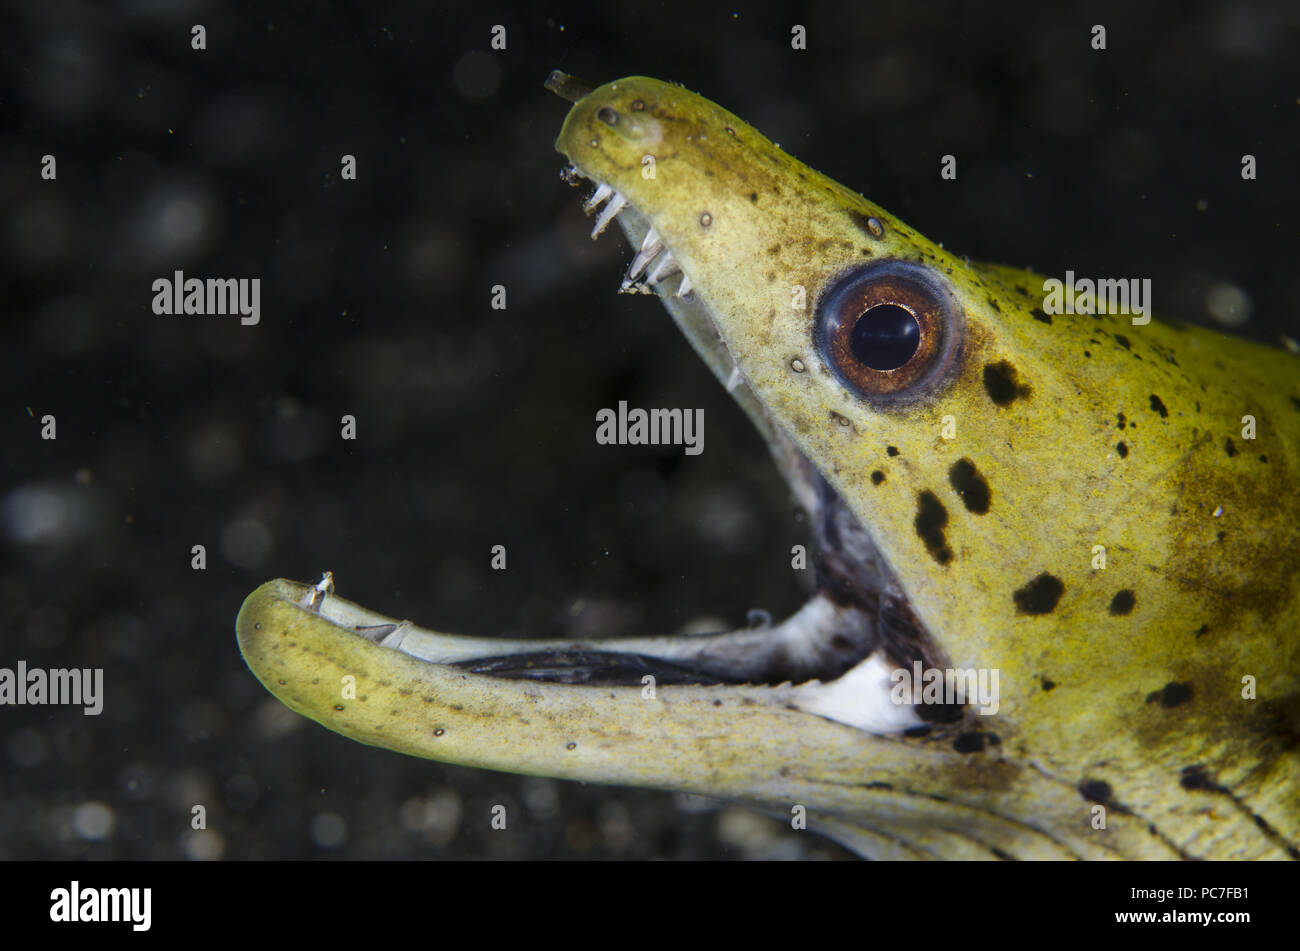 Fimbriated Moray Eel (Gymnothorax fimbriatus), showing teeth, Night dive, TK1 dive site, Lembeh Straits, Sulawesi, Indonesia Stock Photo